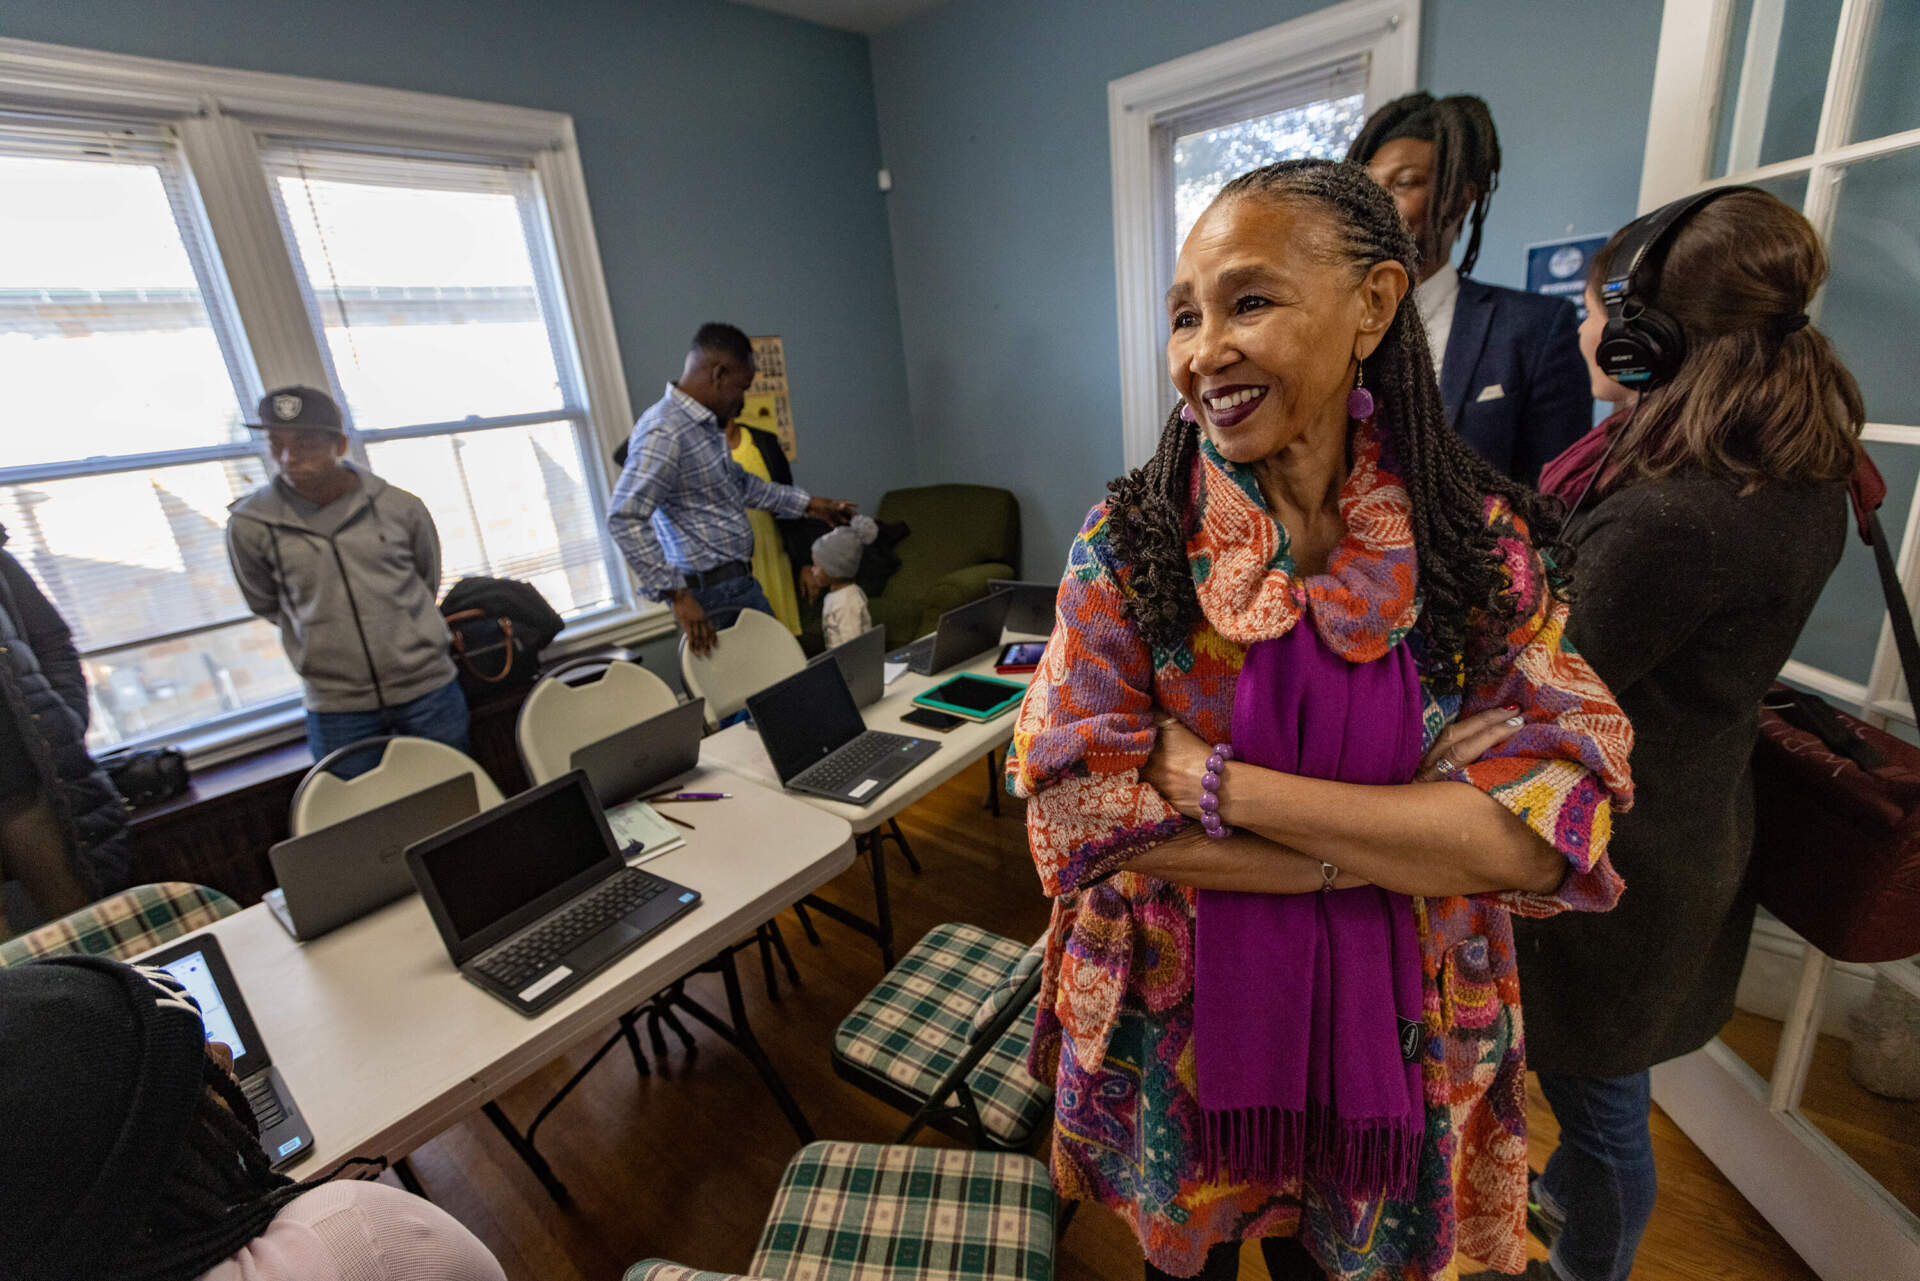 Pastor Gloria White-Hammond smiles as she watches the eight families the church has taken in congregate in the community room. (Jesse Costa/WBUR)